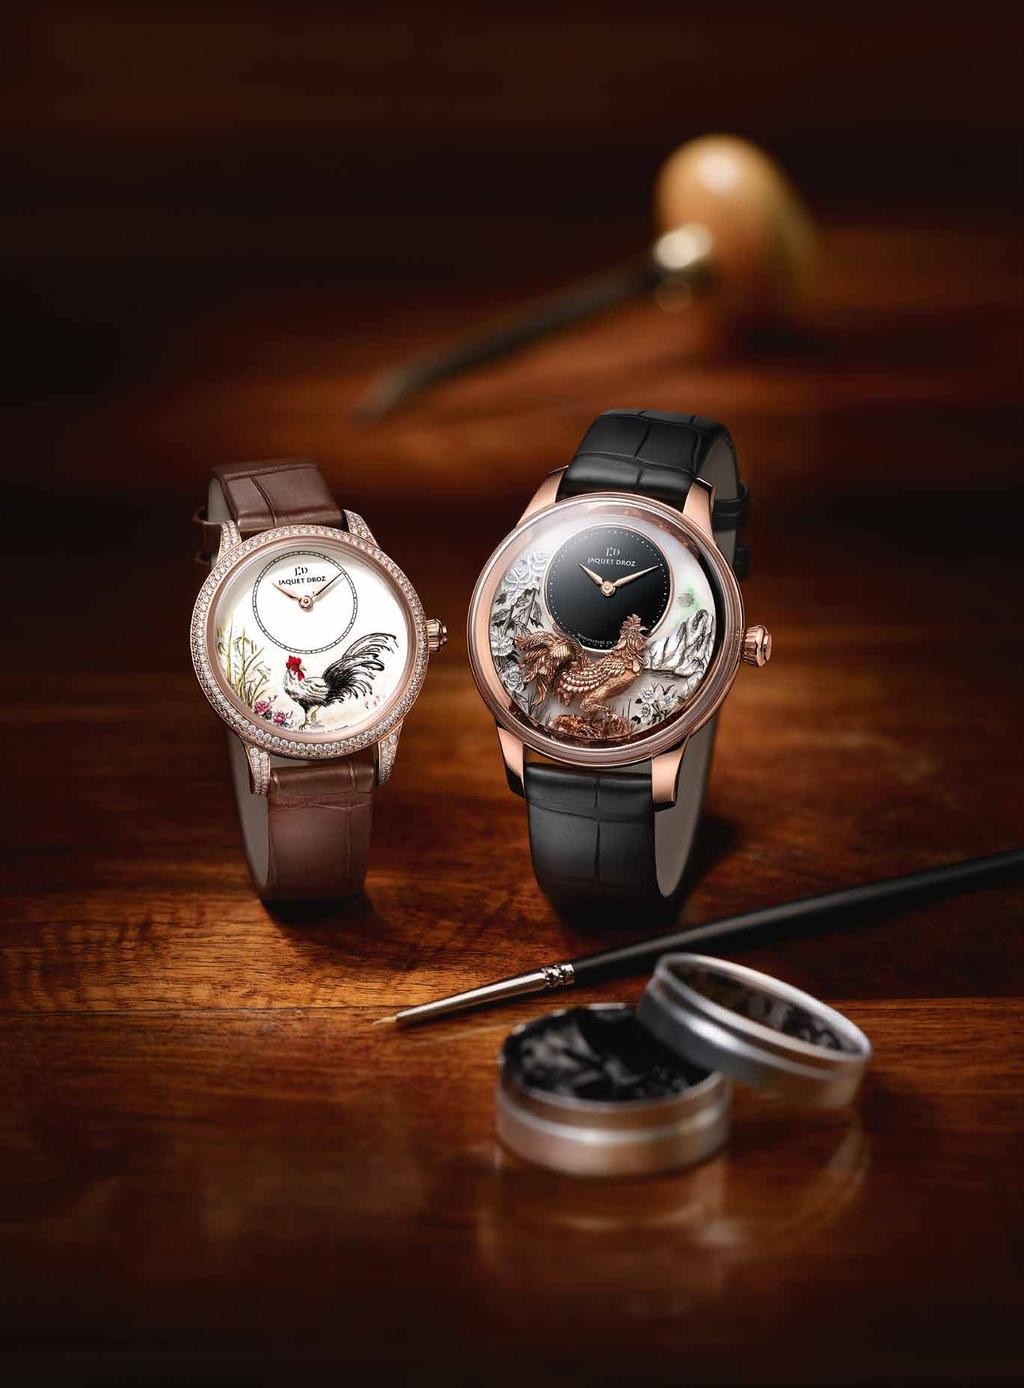 www.jaquet-droz.com (left) Petite Heure Minute Rooster Watch, ivory grand feu enamel dial with miniature painting, 18K red gold case set with diamonds (1.